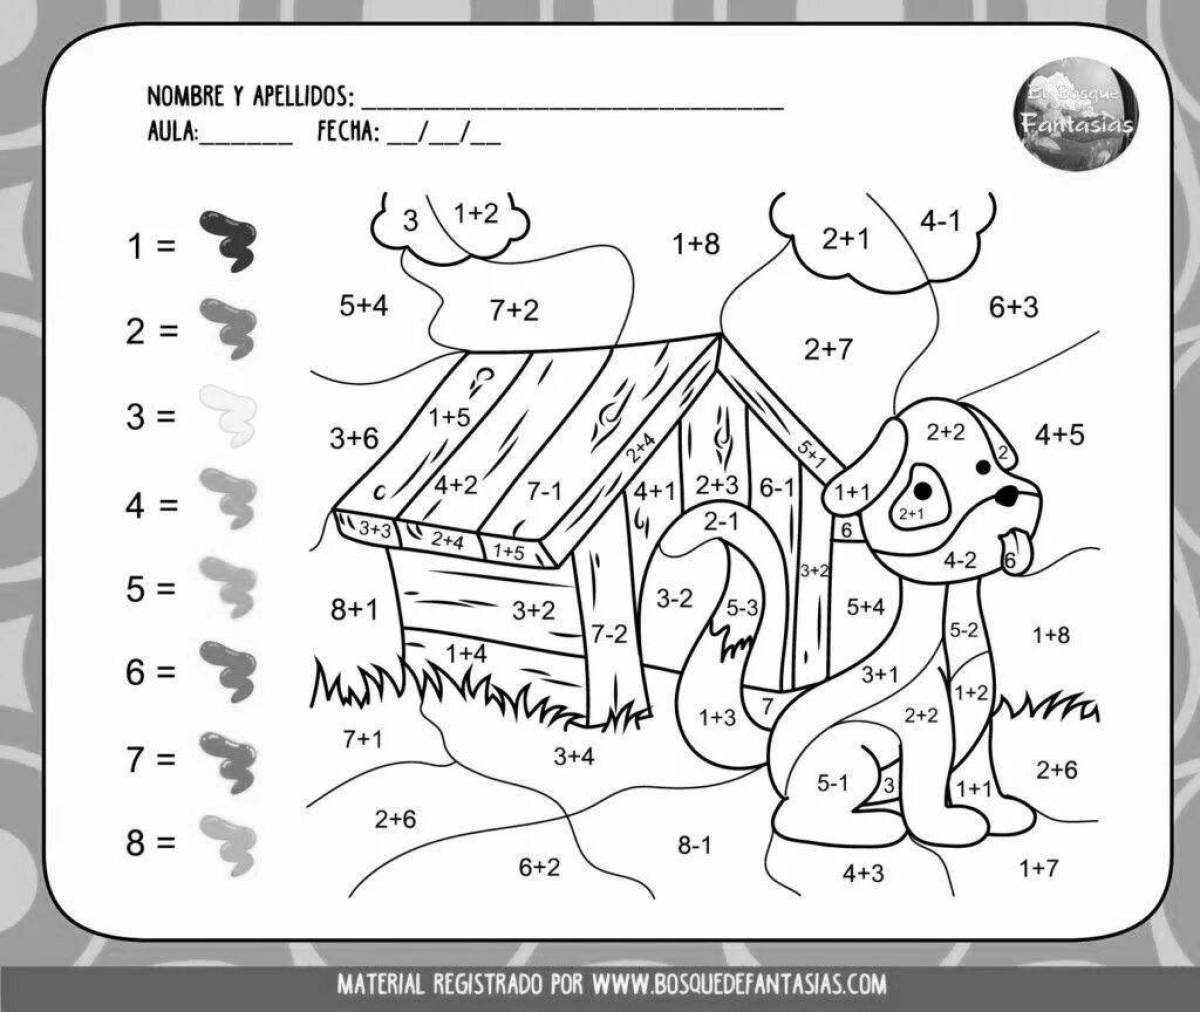 Colorful 1st class number coloring page